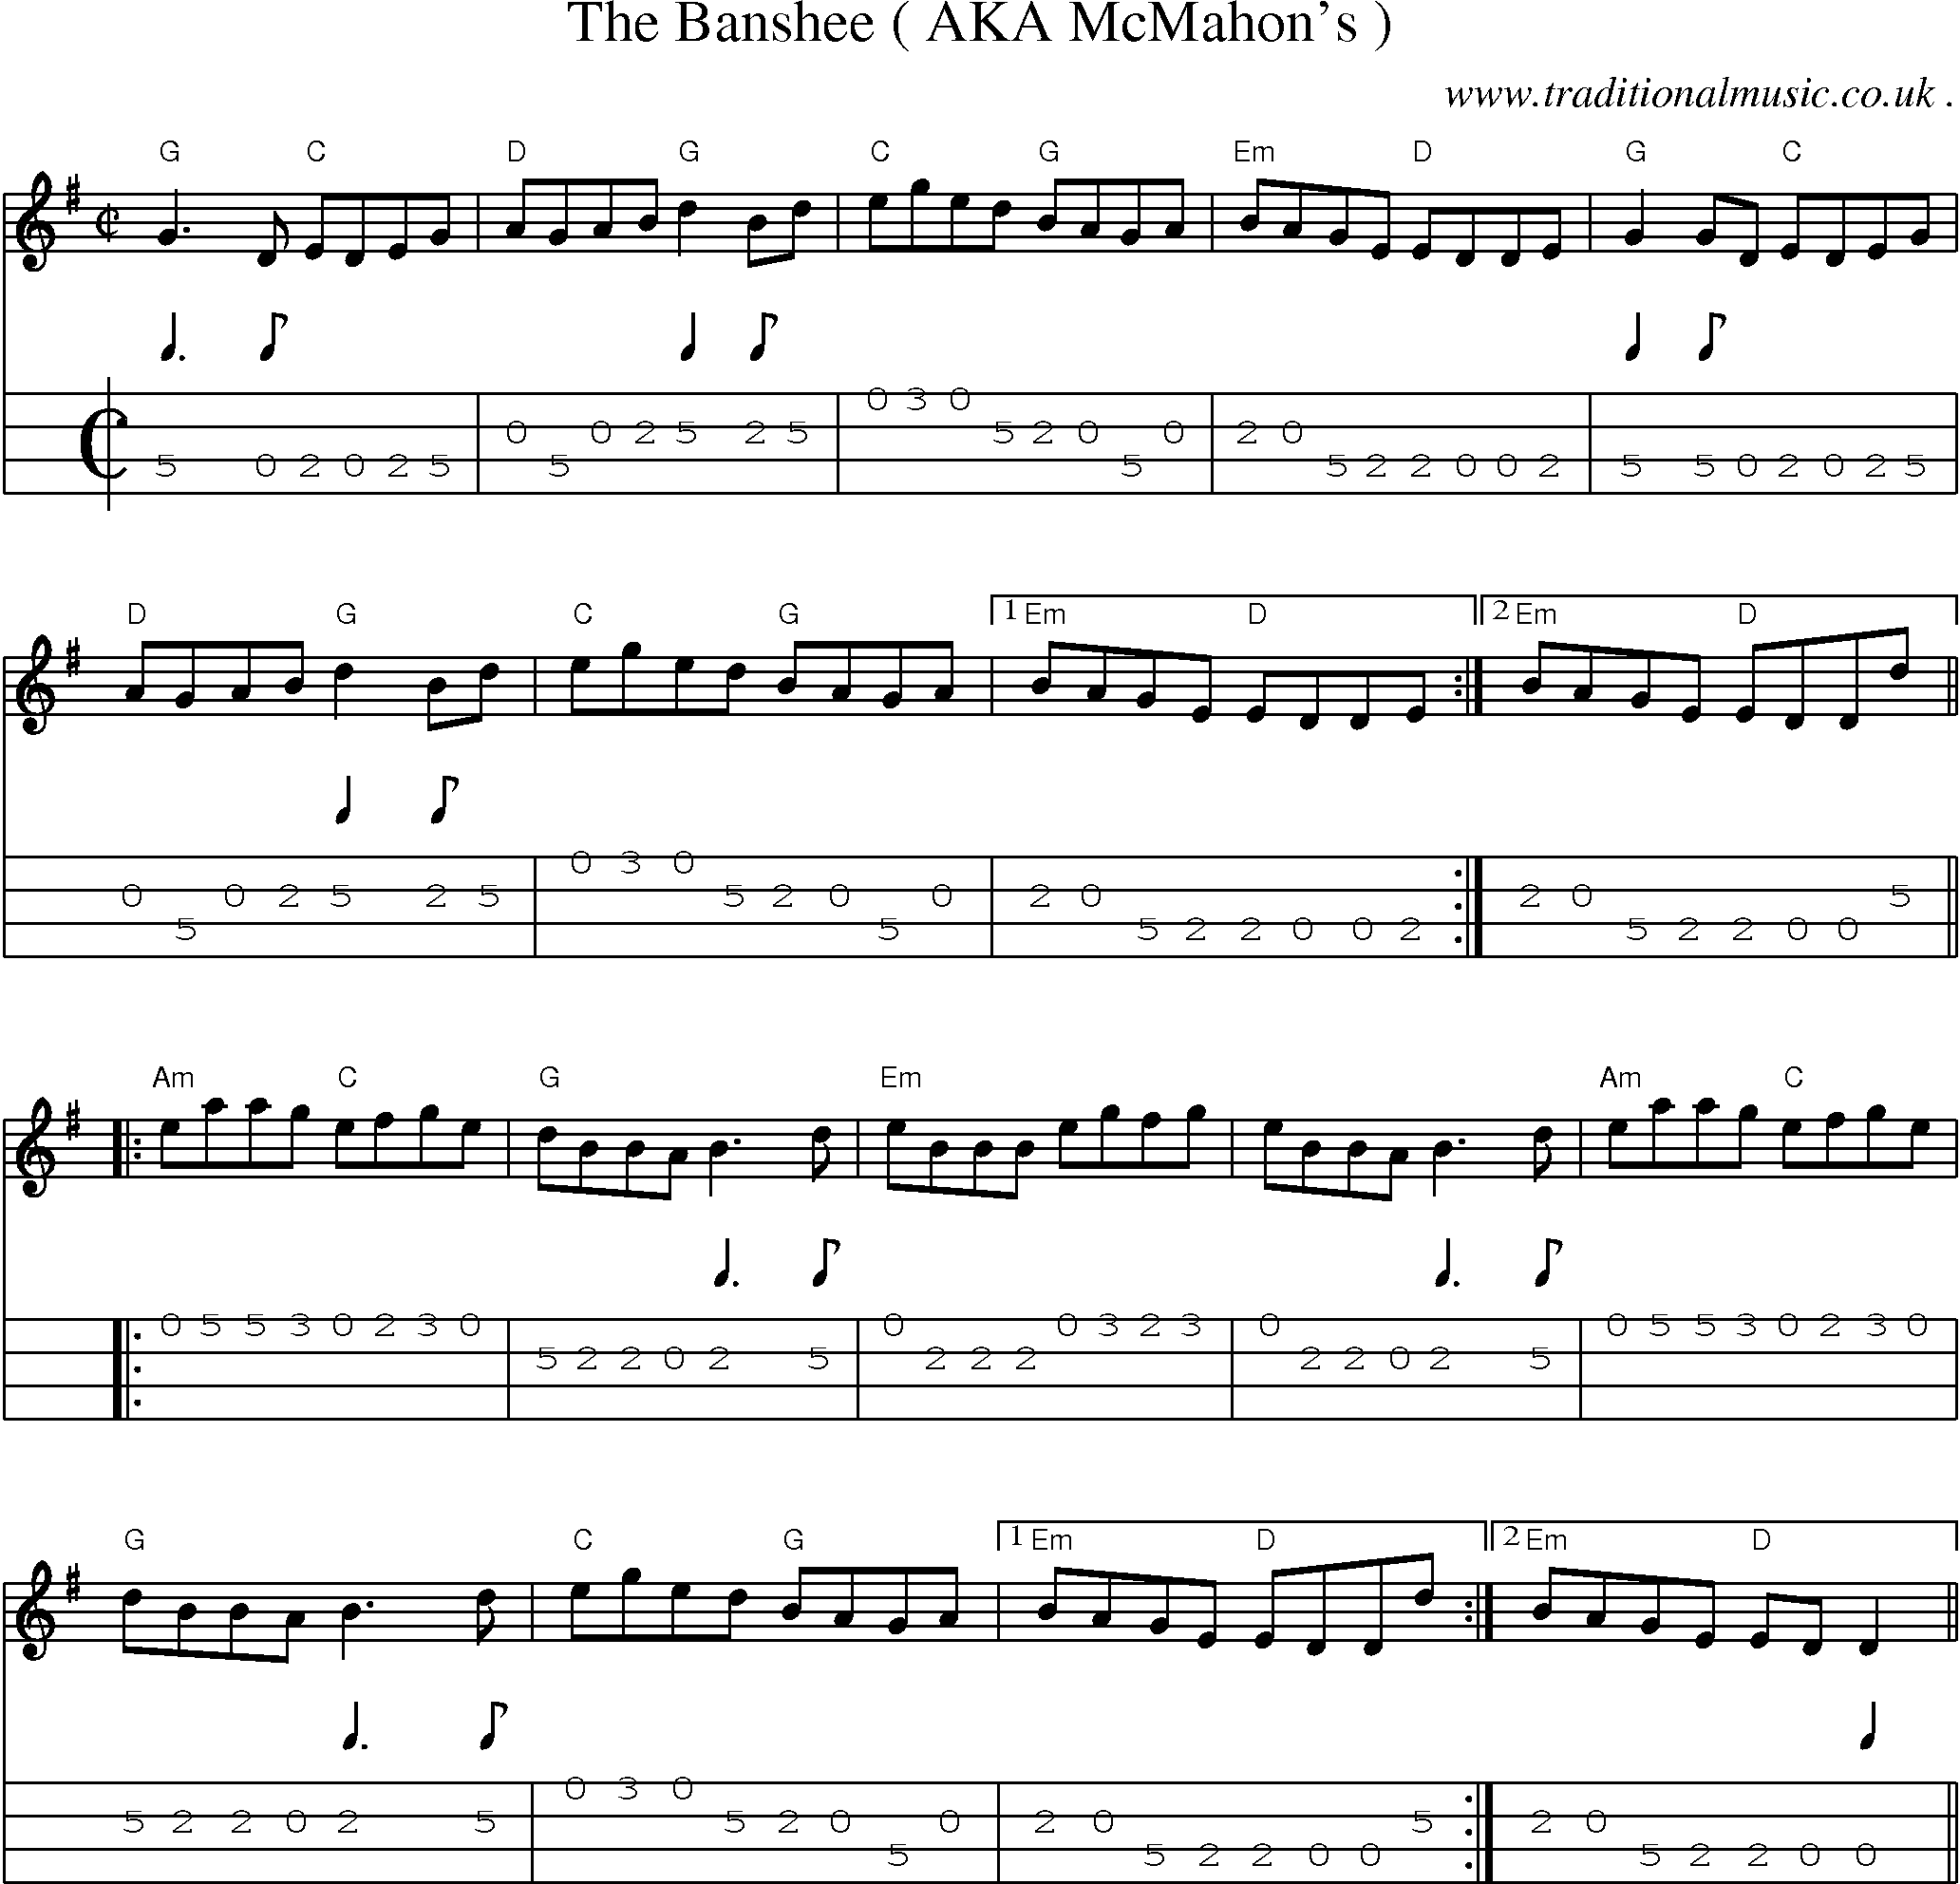 Music Score and Guitar Tabs for The Banshee Aka Mcmahons